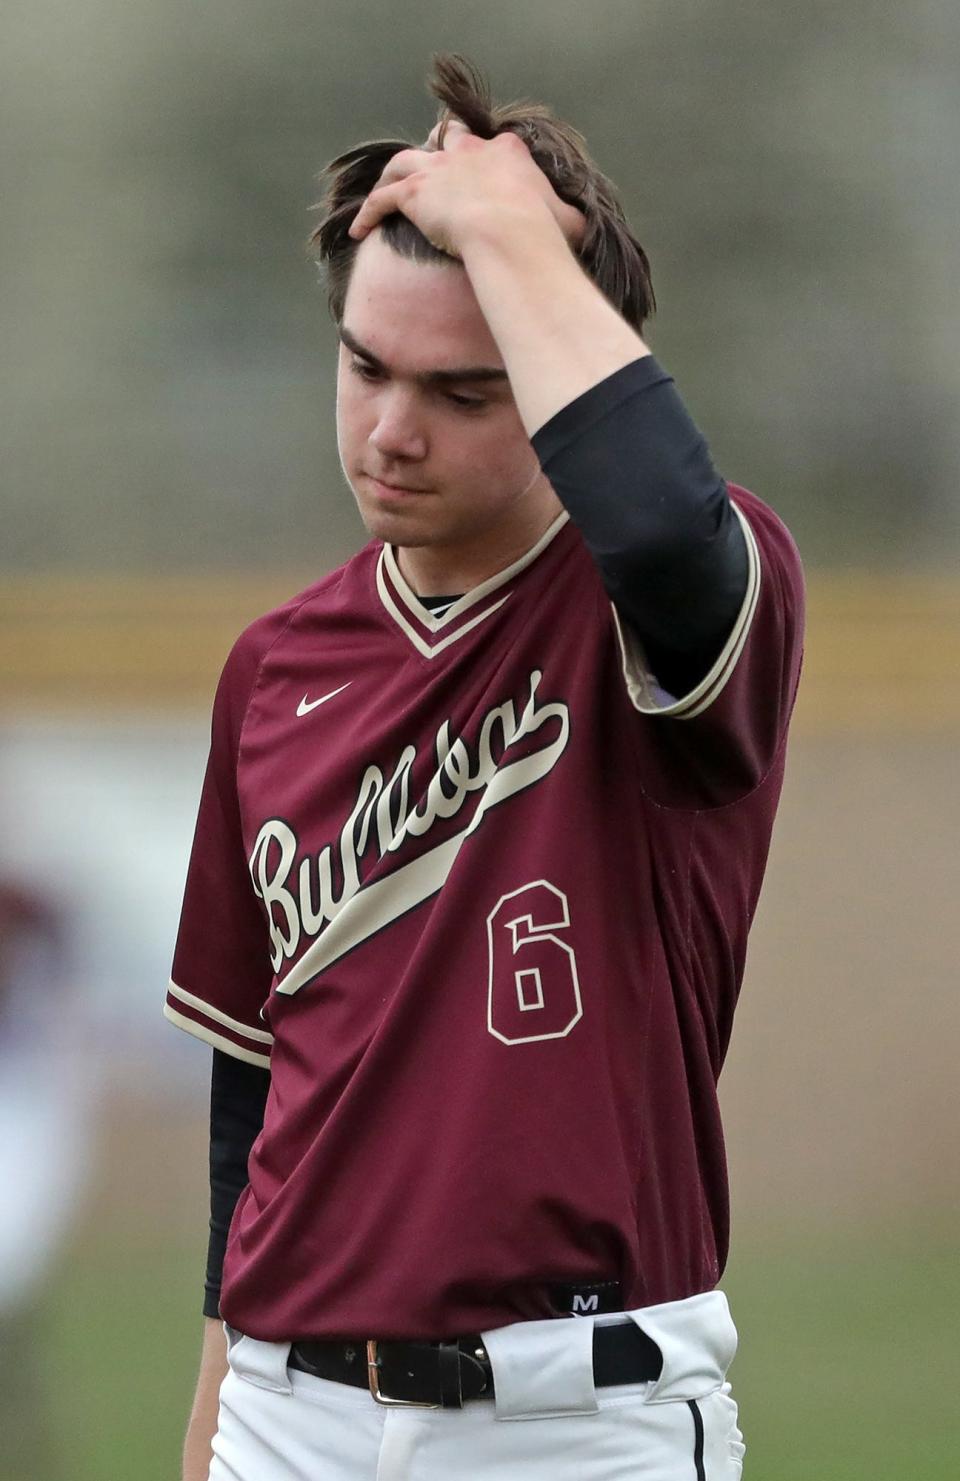 Stow reliever Josh Kupetz reacts as he comes off the field after the Twinsburg Tigers scored 3 runs to take the lead in the top of the seventh inning of a baseball game on Friday in Stow.